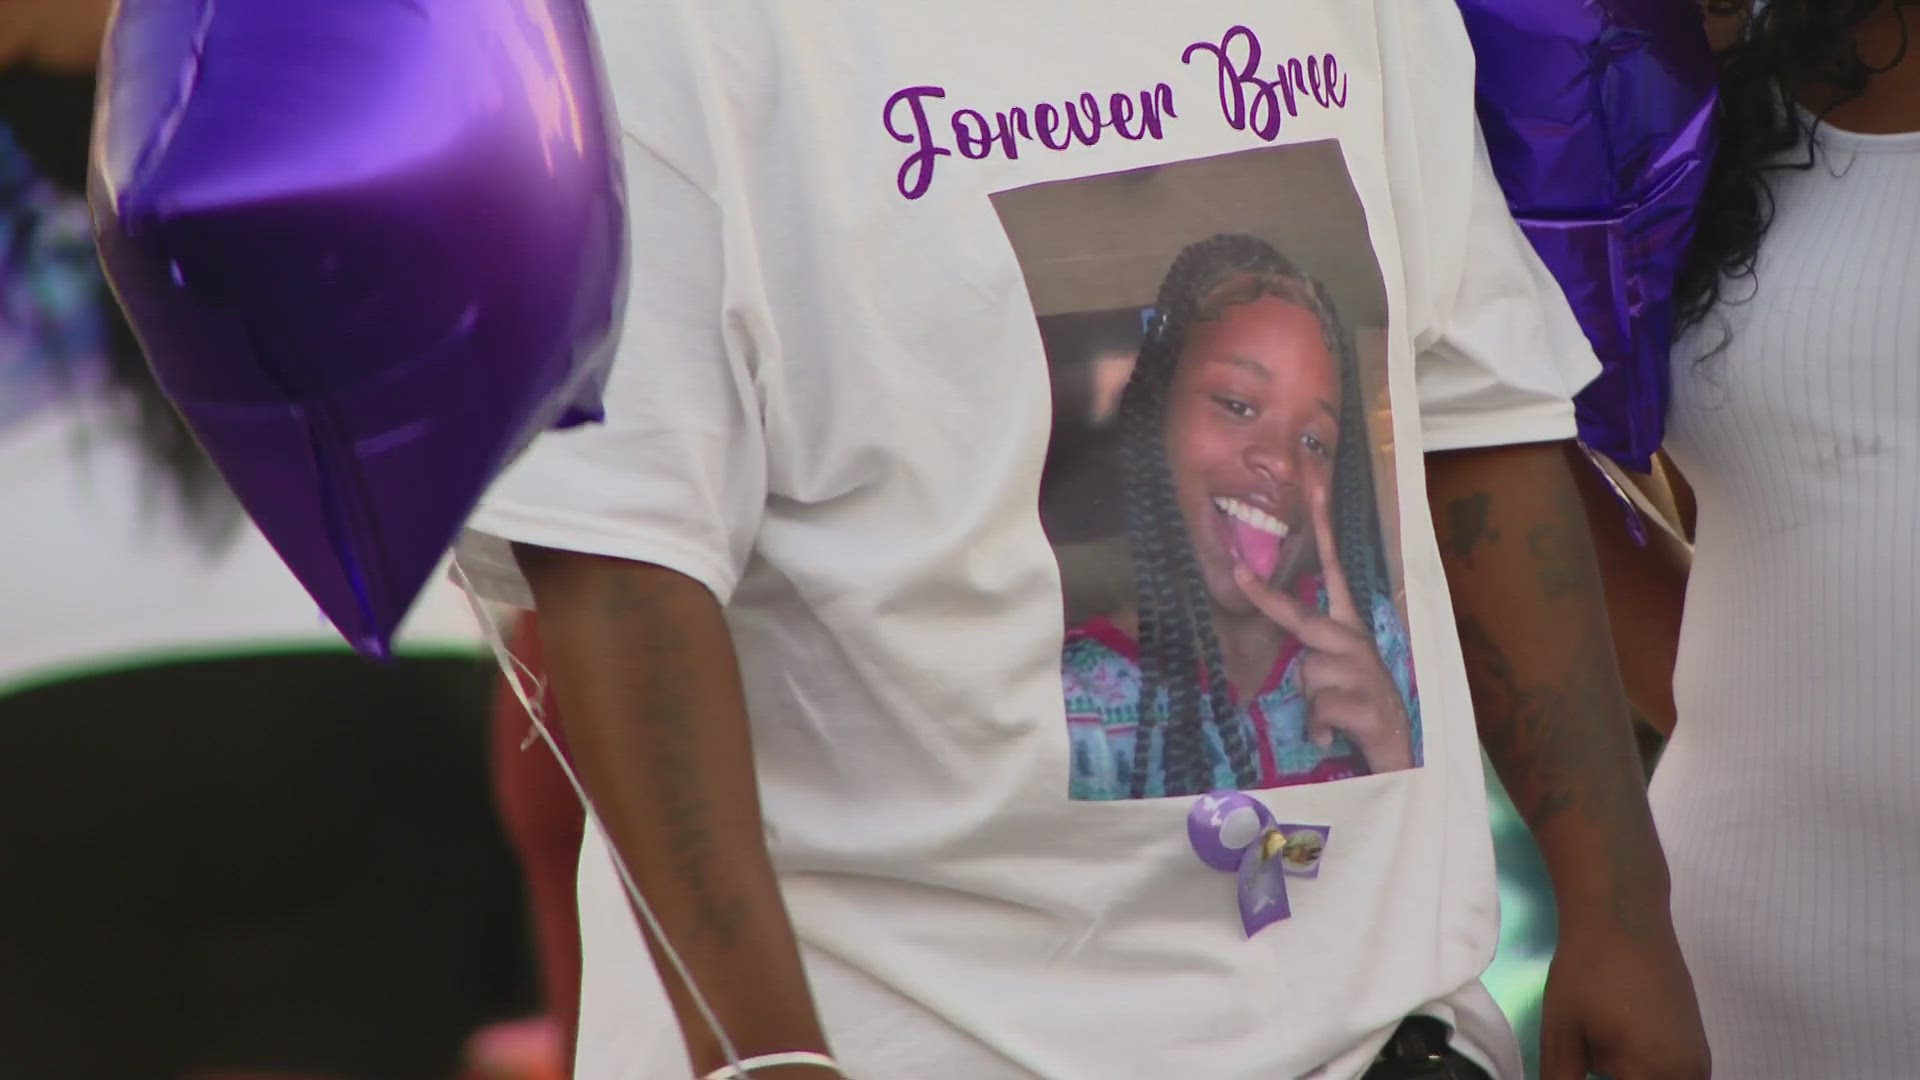 Breyasia Walker's family is preparing to lay her to rest after the teen lost her life to gun violence in August.